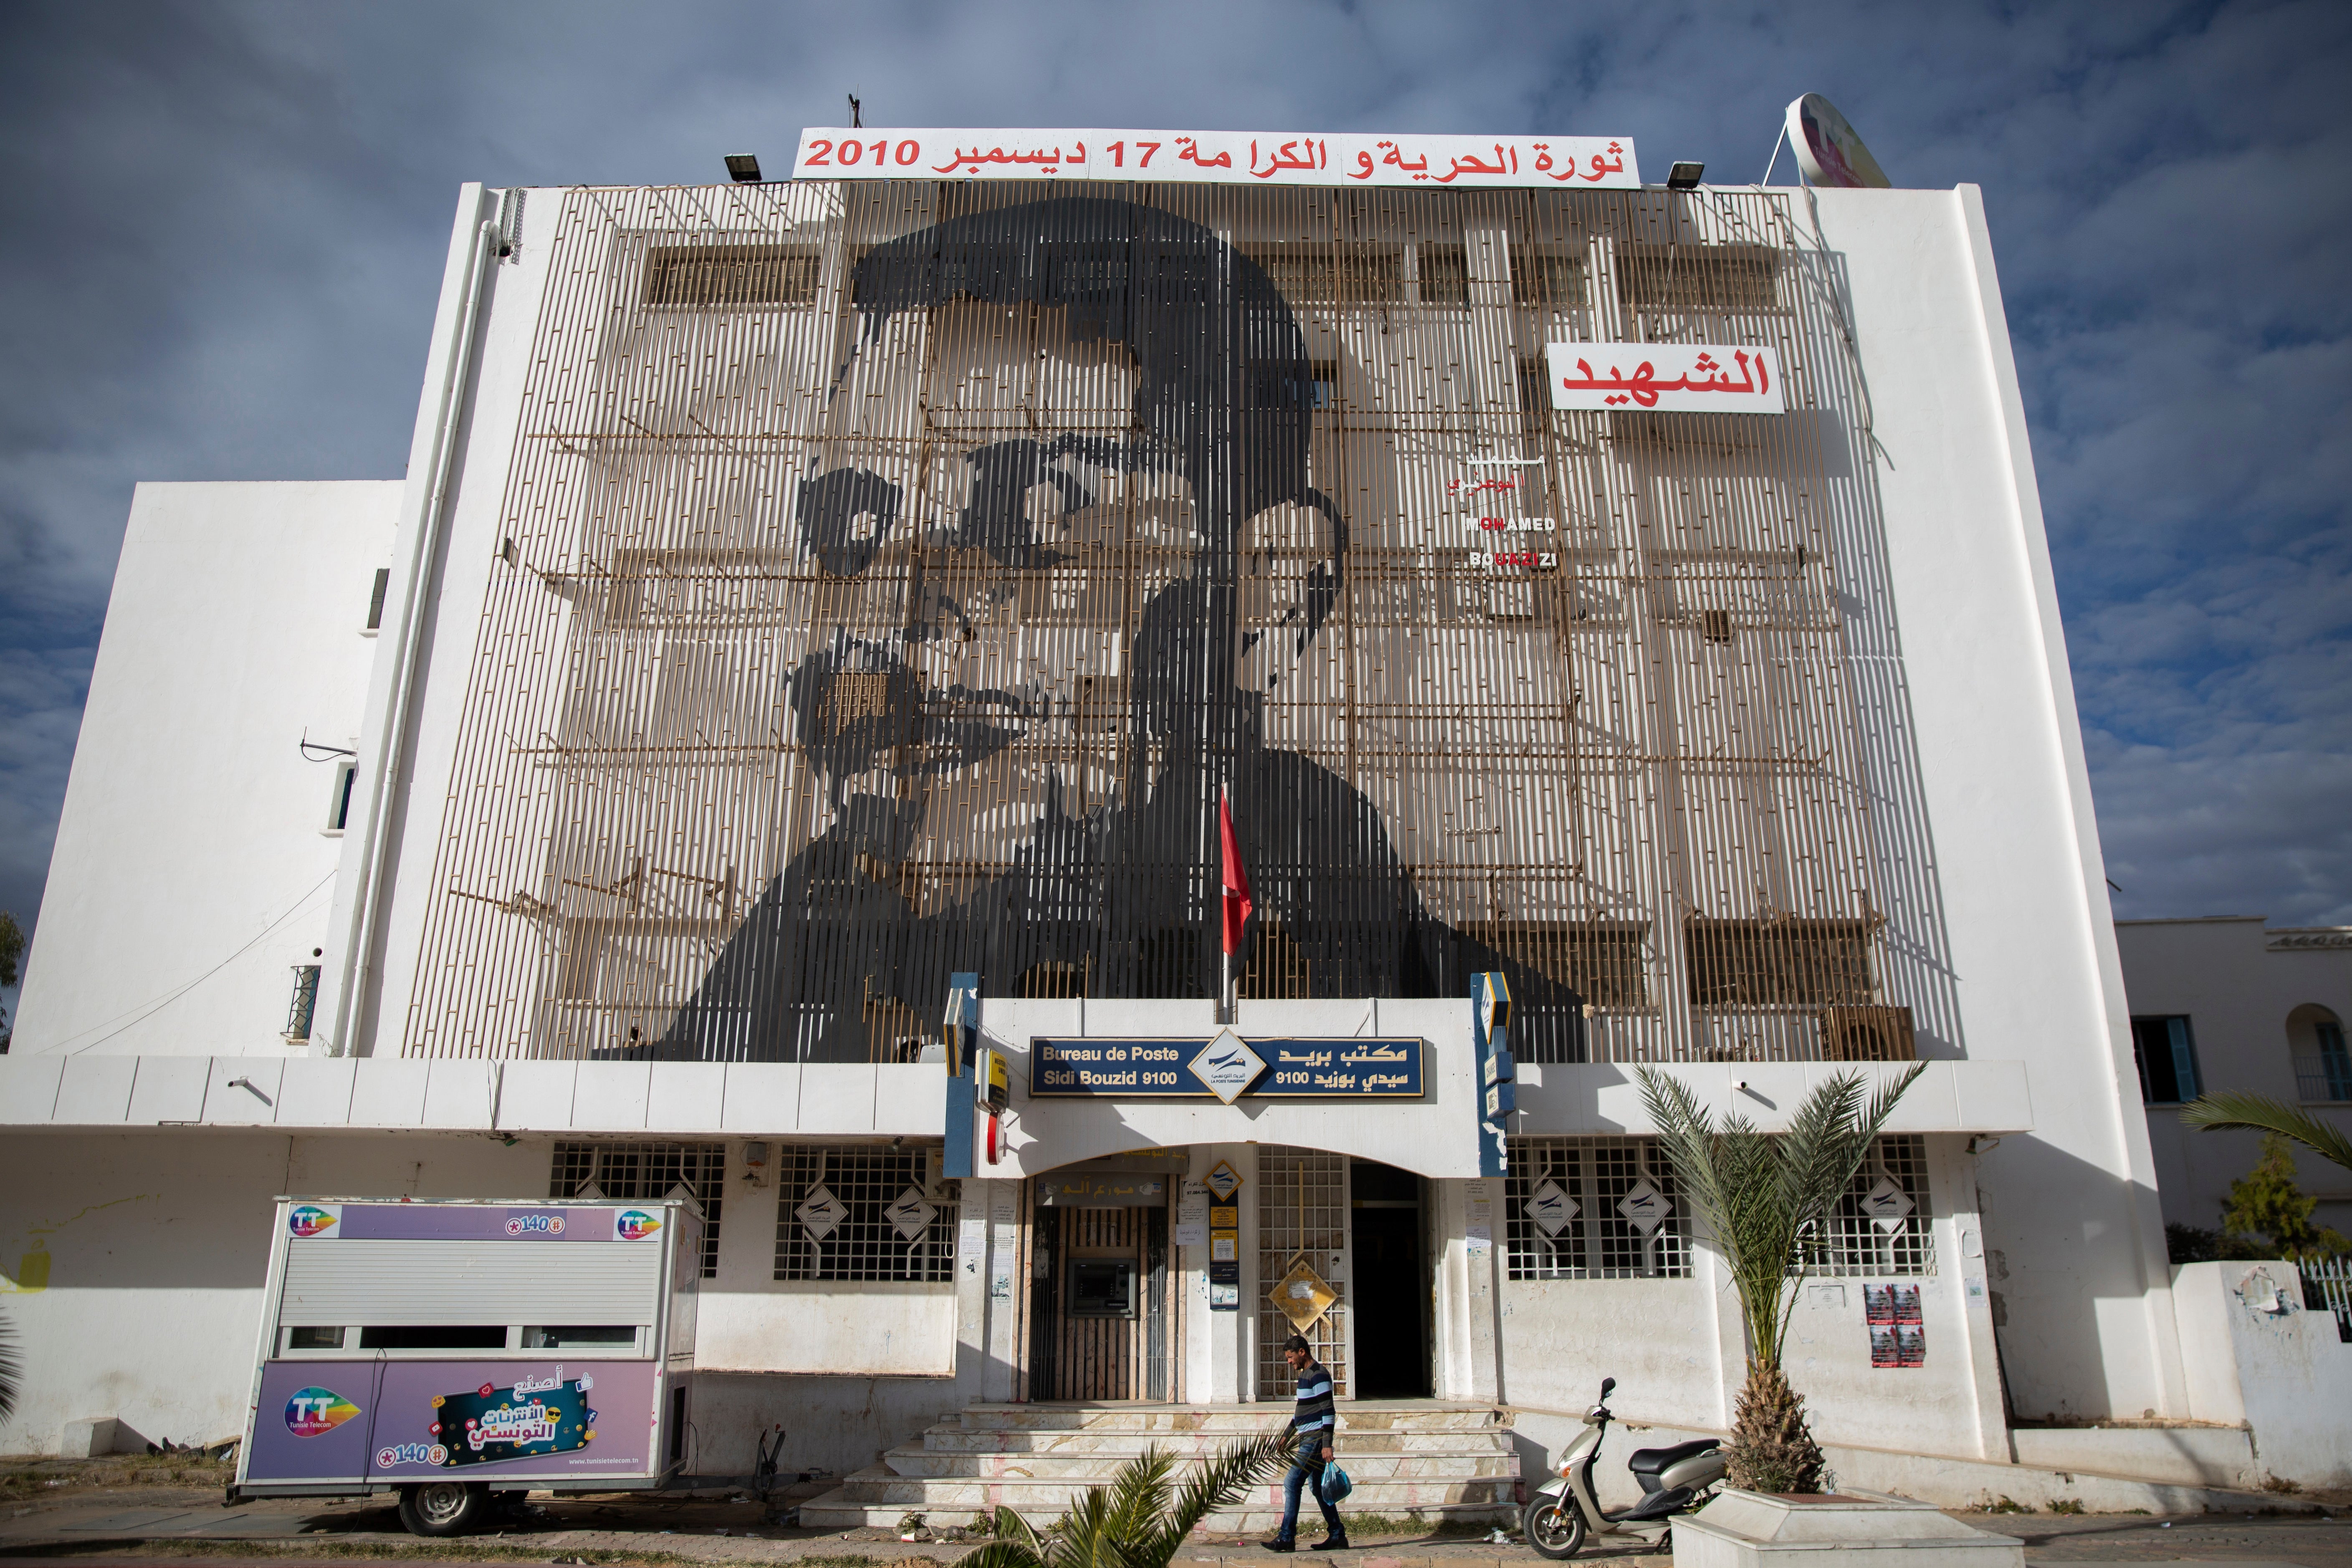 Mohammed Bouazizi depicted on the facade of post office in Sidi Bouzid